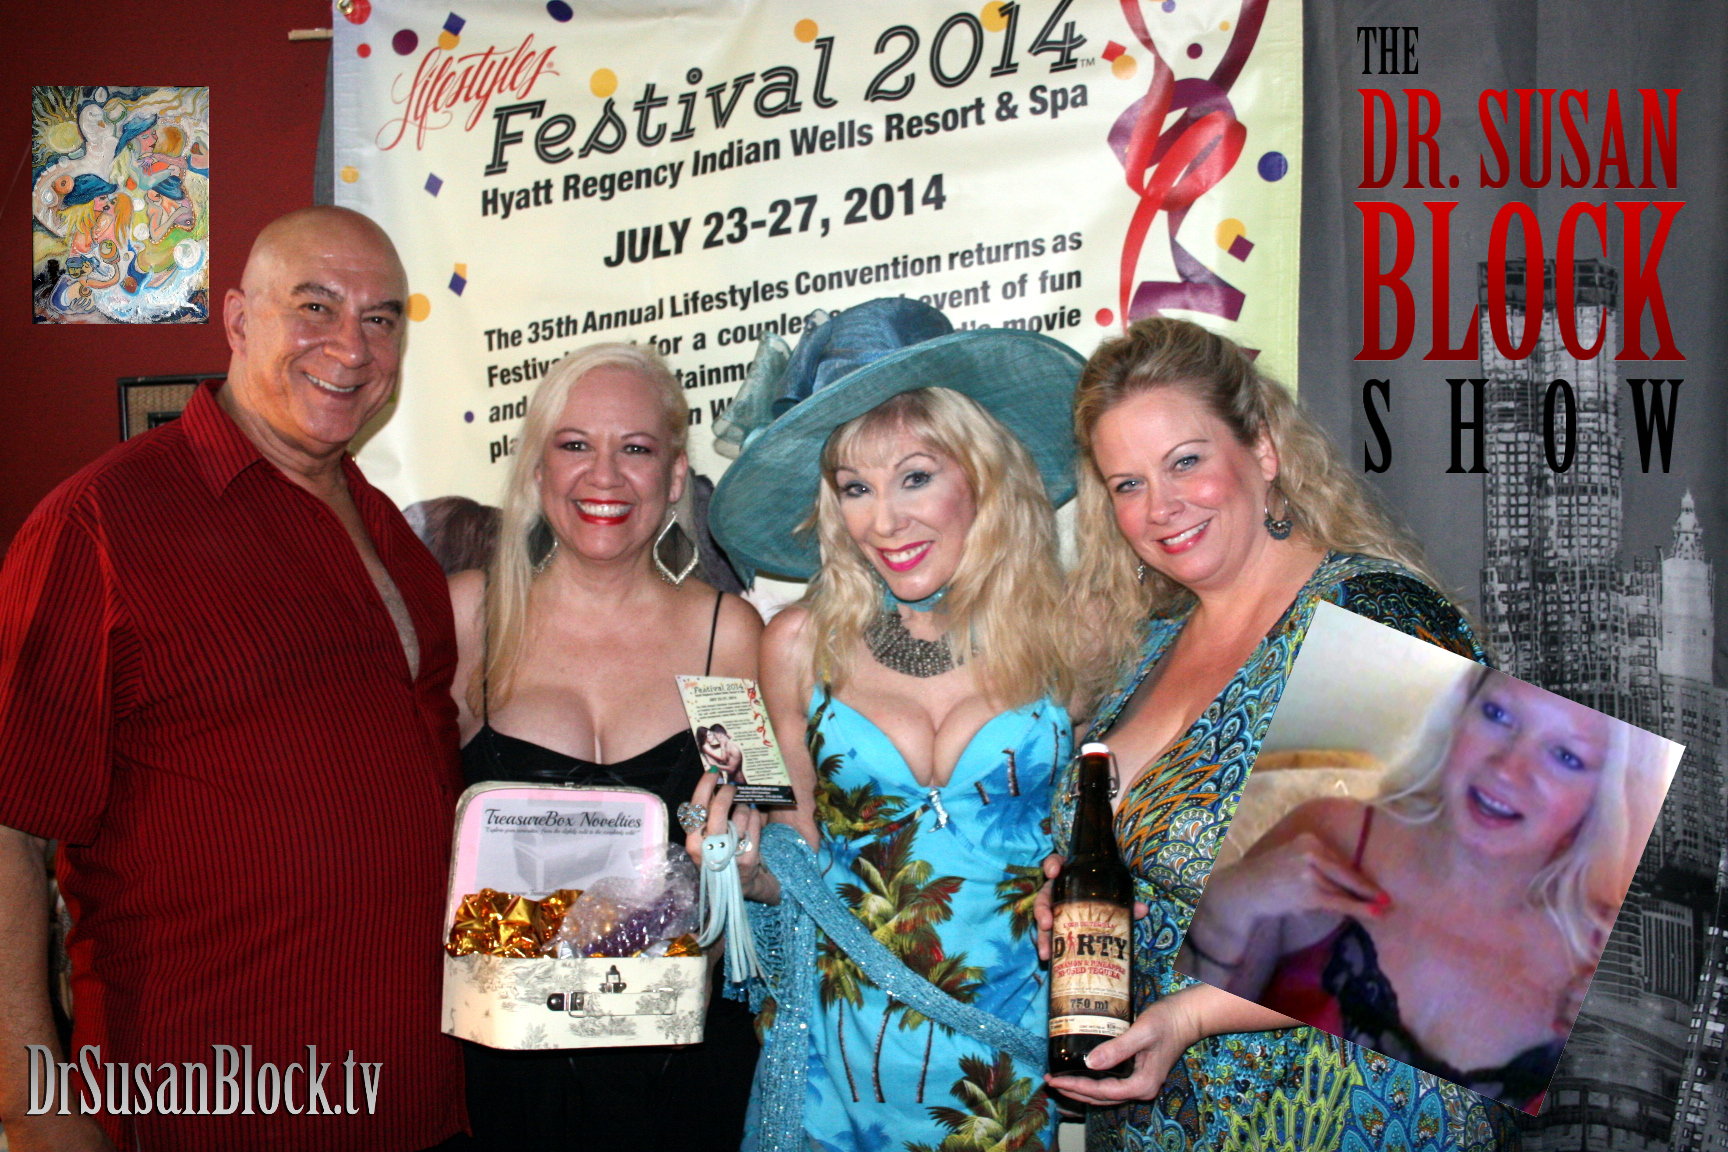 Lifestyles Festival 2014 coordinators Rick Diaz and Mary Diaz (holidng her Treasure Box Novelties "Waterproof Bunny Wall Banger," Dr. Susan Block, Kerry (holding Dirty Tequila) and Layla Now, therapist with the Block Institute.  Photo: L'Erotique